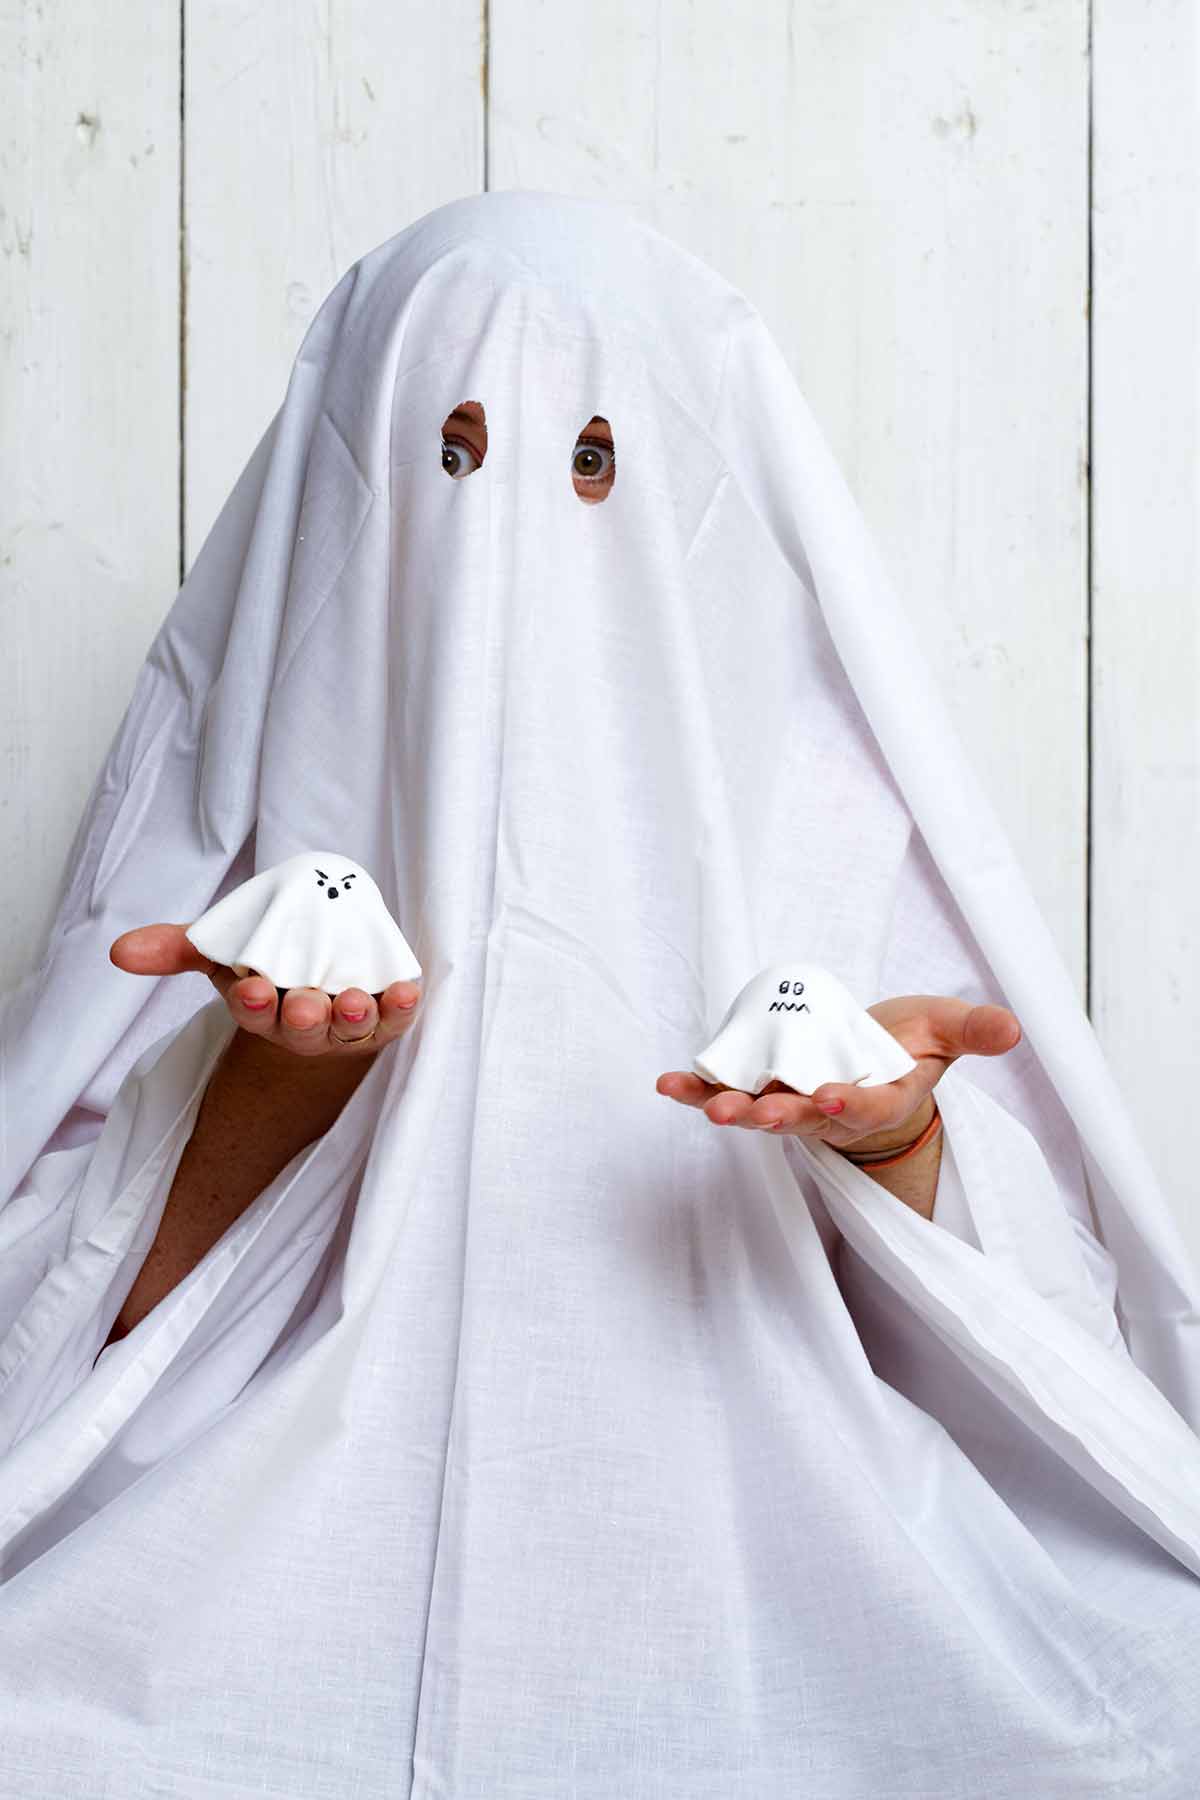 A child dressed as a ghost, holding a ghost cupcake in each hand.